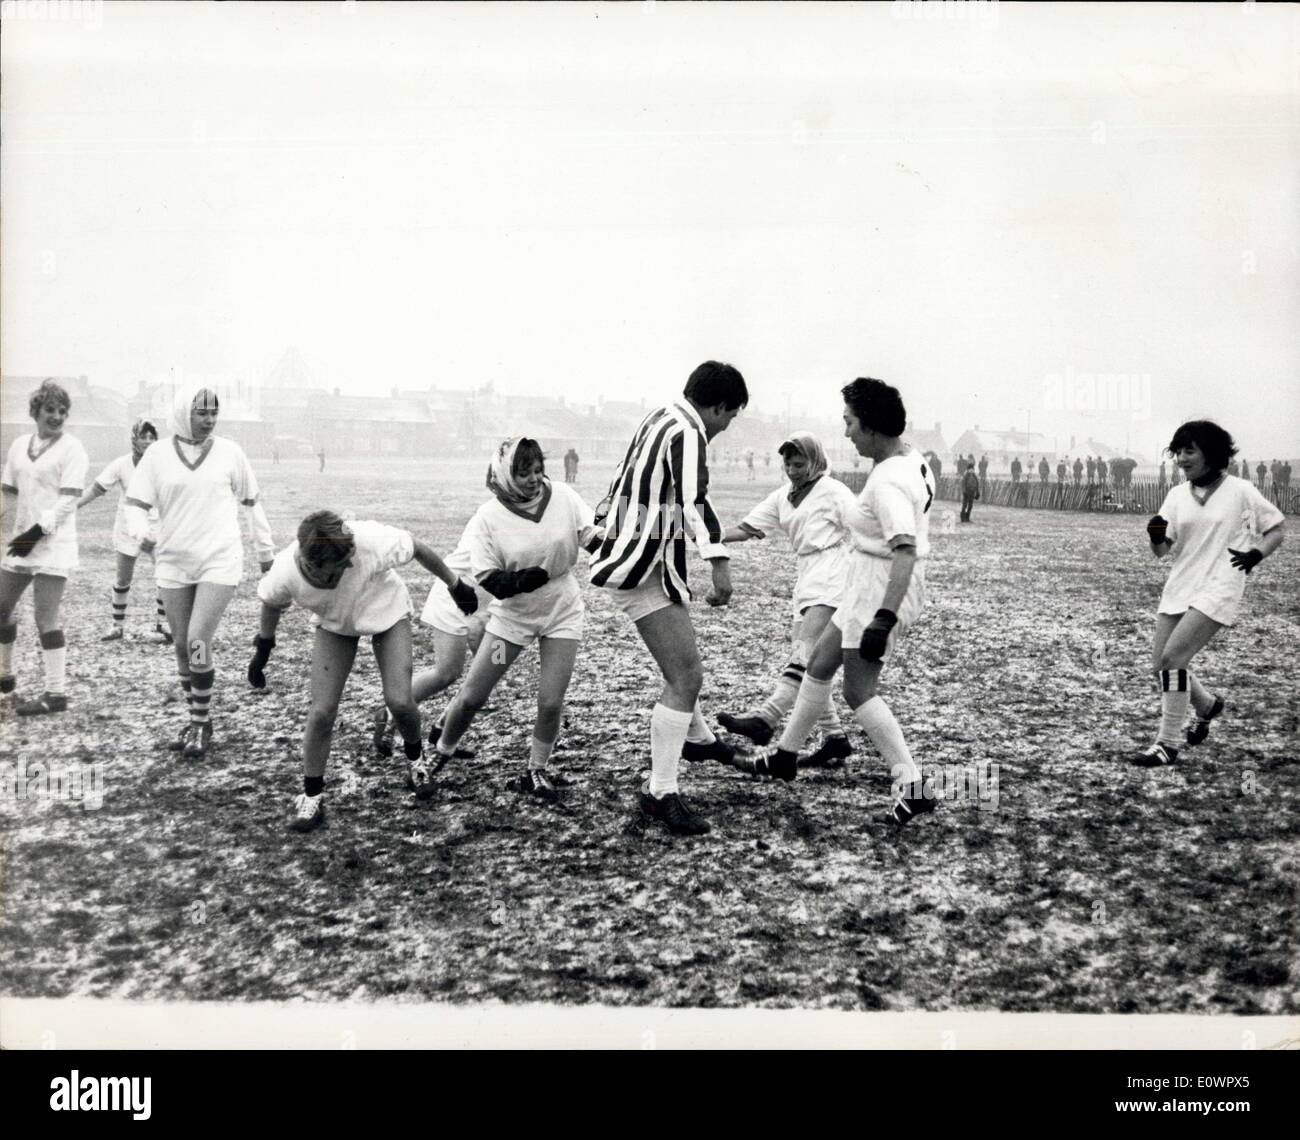 Jan. 13, 1964 - Football Match Or Twisting session? Looking more like a ''twisting session'' at the local dance hall, this incident took place during a charity match played between the Partridge Football Club and a team of their wives and sweethearts in aid of the old people at St. Paul's Cray in Kent yesterday, refereed by Charlton Athletic star Eddie Firmani. At the end nobody really knew who had won, although the girls claimed that they were the victors by 7-6. Stock Photo